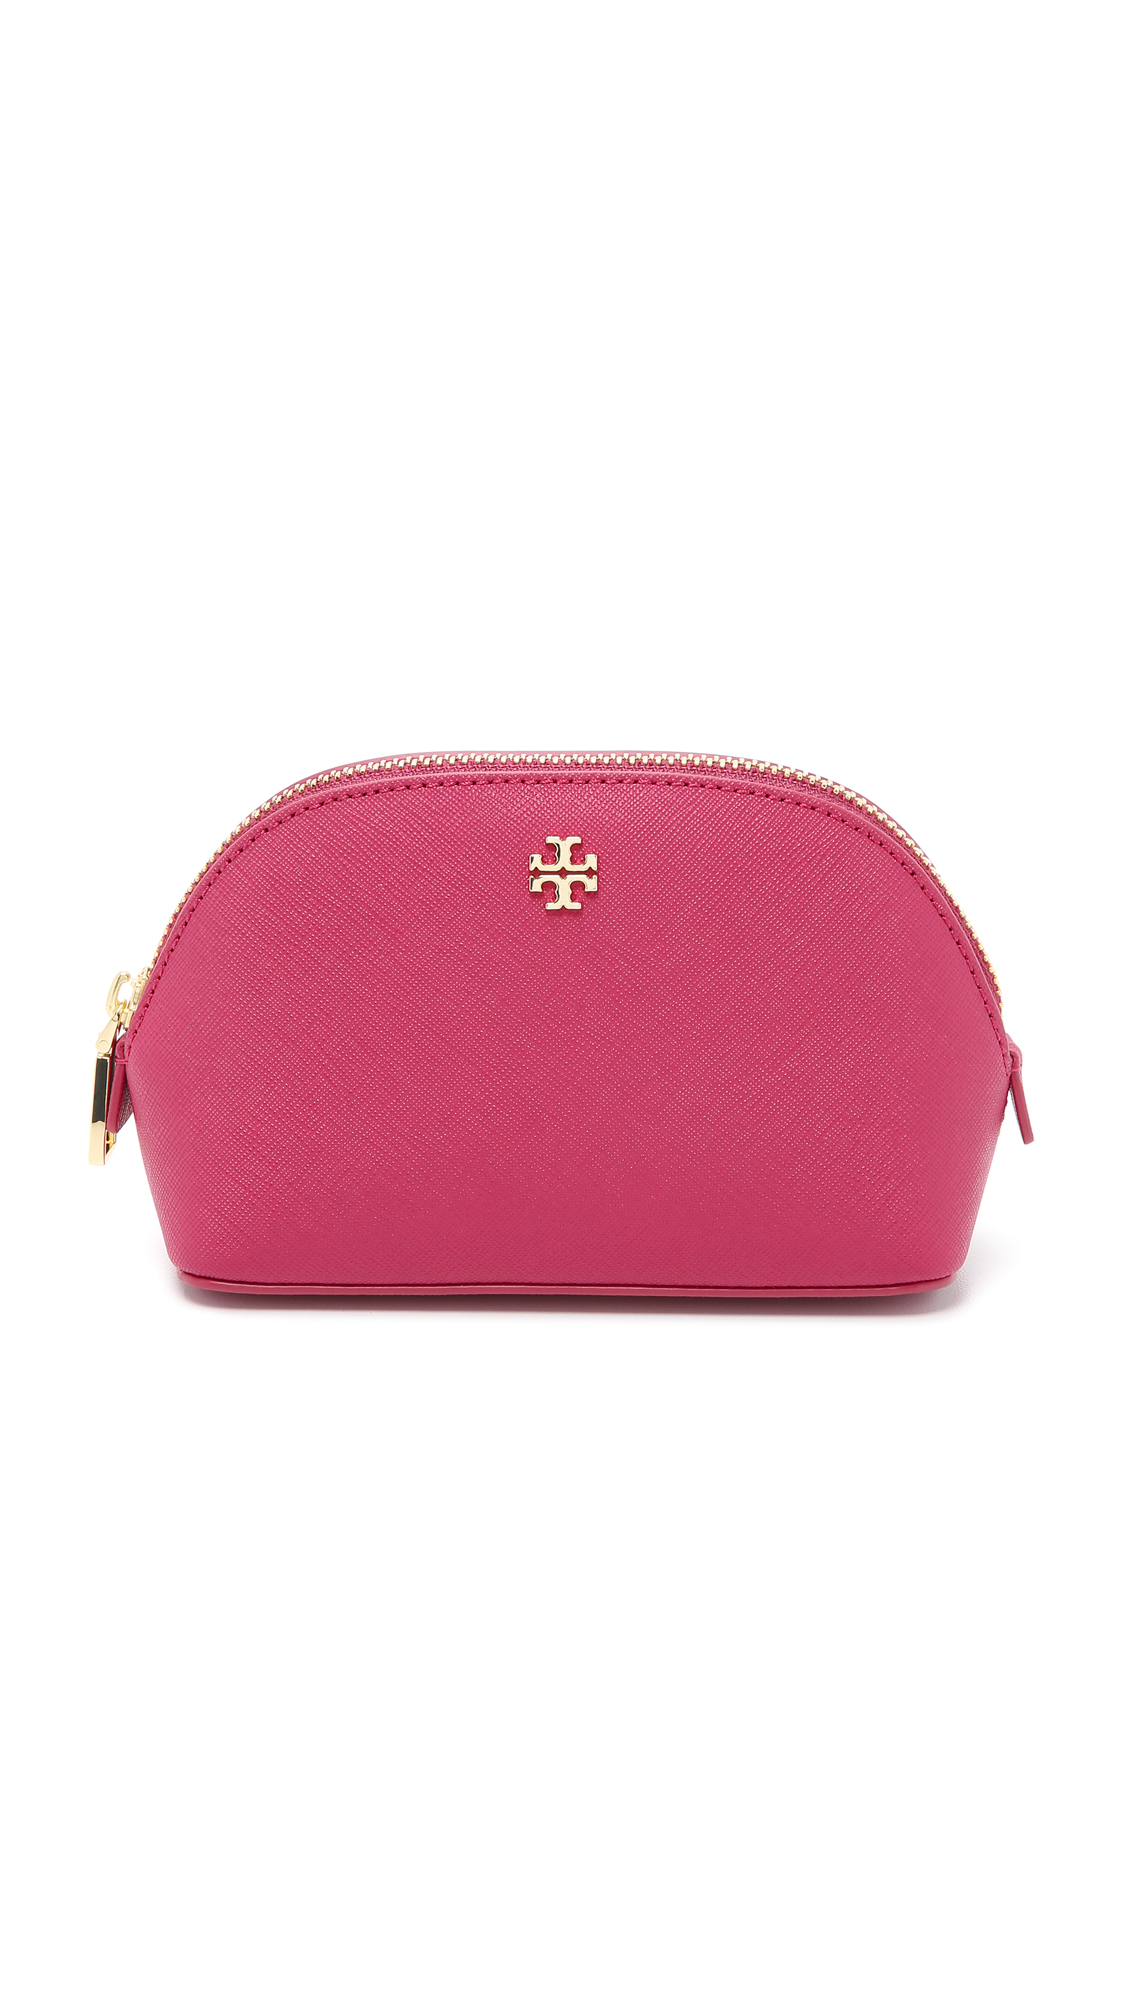 Tory burch York Small Makeup Bag - Raspberry in Pink | Lyst